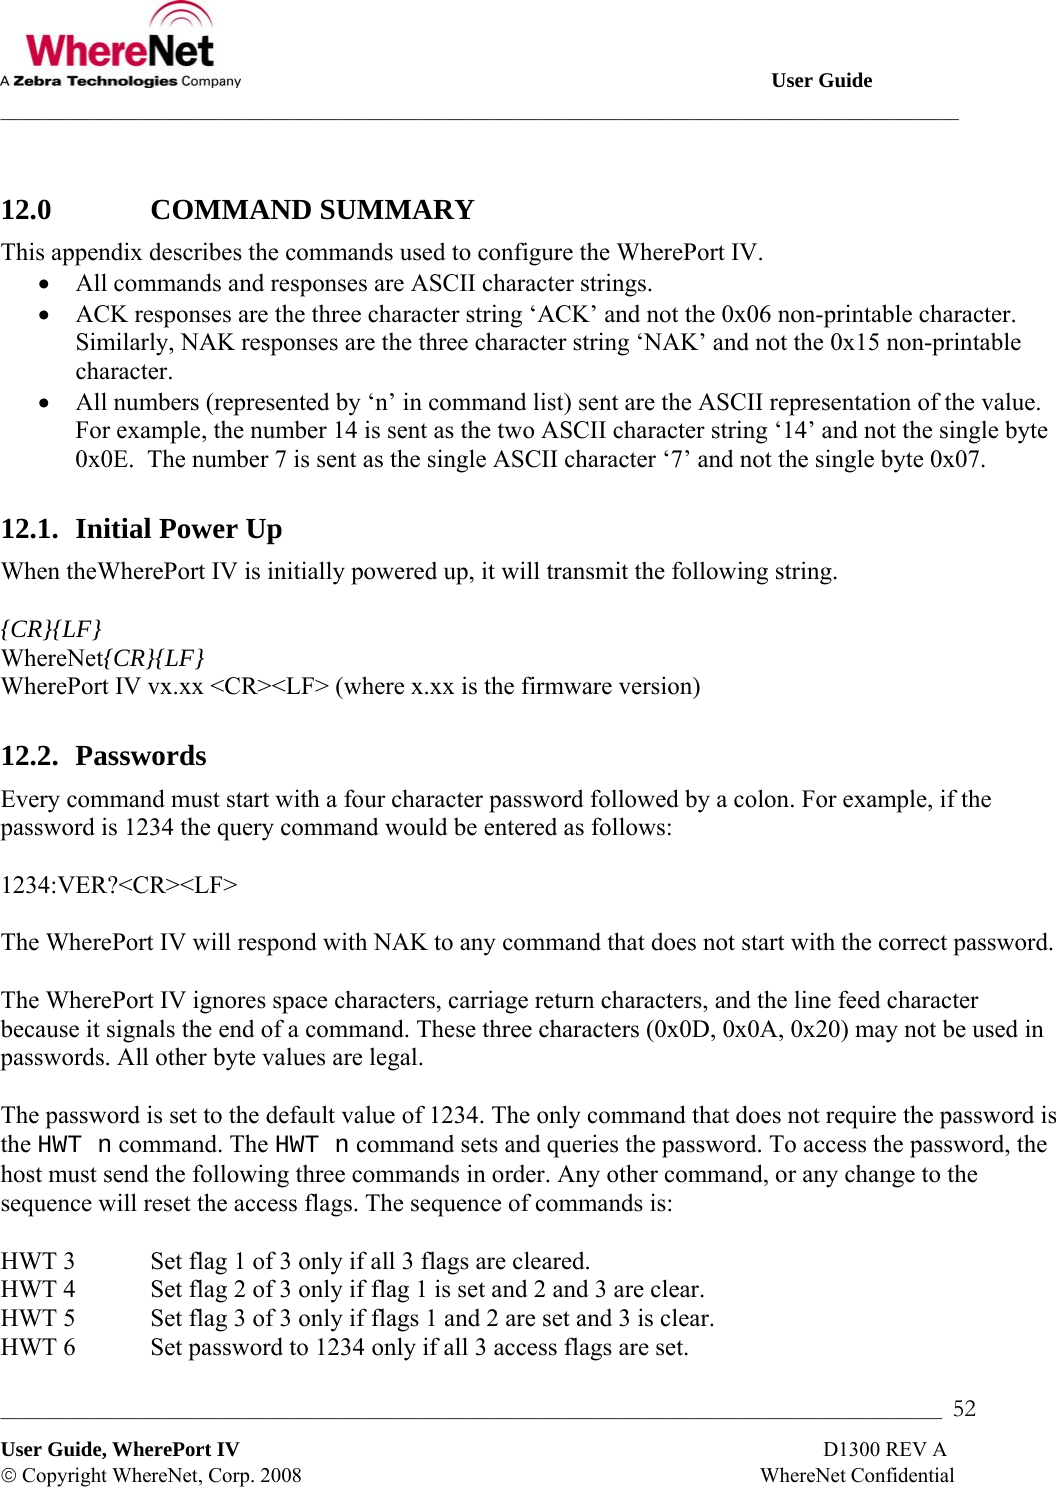                                                                                                       User Guide ___________________________________________________________________________________________________________________ _________________________________________________________________________________________________________________  52 User Guide, WherePort IV                                                                                                                D1300 REV A © Copyright WhereNet, Corp. 2008                                                                                        WhereNet Confidential  12.0   COMMAND SUMMARY This appendix describes the commands used to configure the WherePort IV.  • All commands and responses are ASCII character strings. • ACK responses are the three character string ‘ACK’ and not the 0x06 non-printable character. Similarly, NAK responses are the three character string ‘NAK’ and not the 0x15 non-printable character. • All numbers (represented by ‘n’ in command list) sent are the ASCII representation of the value. For example, the number 14 is sent as the two ASCII character string ‘14’ and not the single byte 0x0E.  The number 7 is sent as the single ASCII character ‘7’ and not the single byte 0x07. 12.1.  Initial Power Up When theWherePort IV is initially powered up, it will transmit the following string.  {CR}{LF} WhereNet{CR}{LF} WherePort IV vx.xx &lt;CR&gt;&lt;LF&gt; (where x.xx is the firmware version) 12.2.  Passwords Every command must start with a four character password followed by a colon. For example, if the password is 1234 the query command would be entered as follows:  1234:VER?&lt;CR&gt;&lt;LF&gt;  The WherePort IV will respond with NAK to any command that does not start with the correct password.  The WherePort IV ignores space characters, carriage return characters, and the line feed character because it signals the end of a command. These three characters (0x0D, 0x0A, 0x20) may not be used in passwords. All other byte values are legal.  The password is set to the default value of 1234. The only command that does not require the password is the HWT n command. The HWT n command sets and queries the password. To access the password, the host must send the following three commands in order. Any other command, or any change to the sequence will reset the access flags. The sequence of commands is:  HWT 3  Set flag 1 of 3 only if all 3 flags are cleared. HWT 4  Set flag 2 of 3 only if flag 1 is set and 2 and 3 are clear. HWT 5  Set flag 3 of 3 only if flags 1 and 2 are set and 3 is clear. HWT 6  Set password to 1234 only if all 3 access flags are set. 